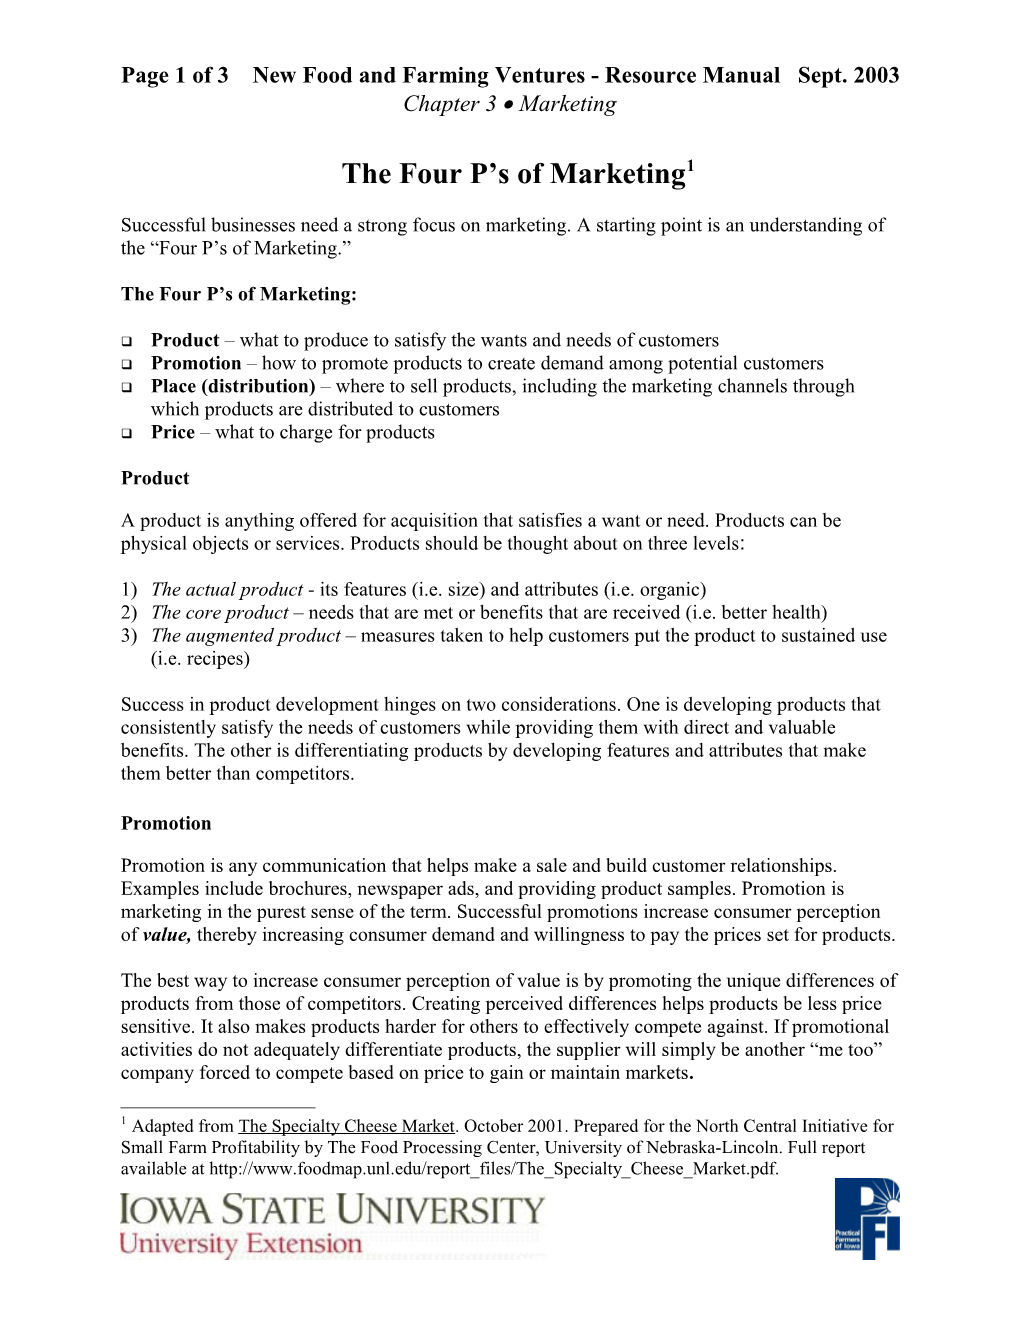 The Four P S of Marketing Are Part of Every Basic Marketing Course